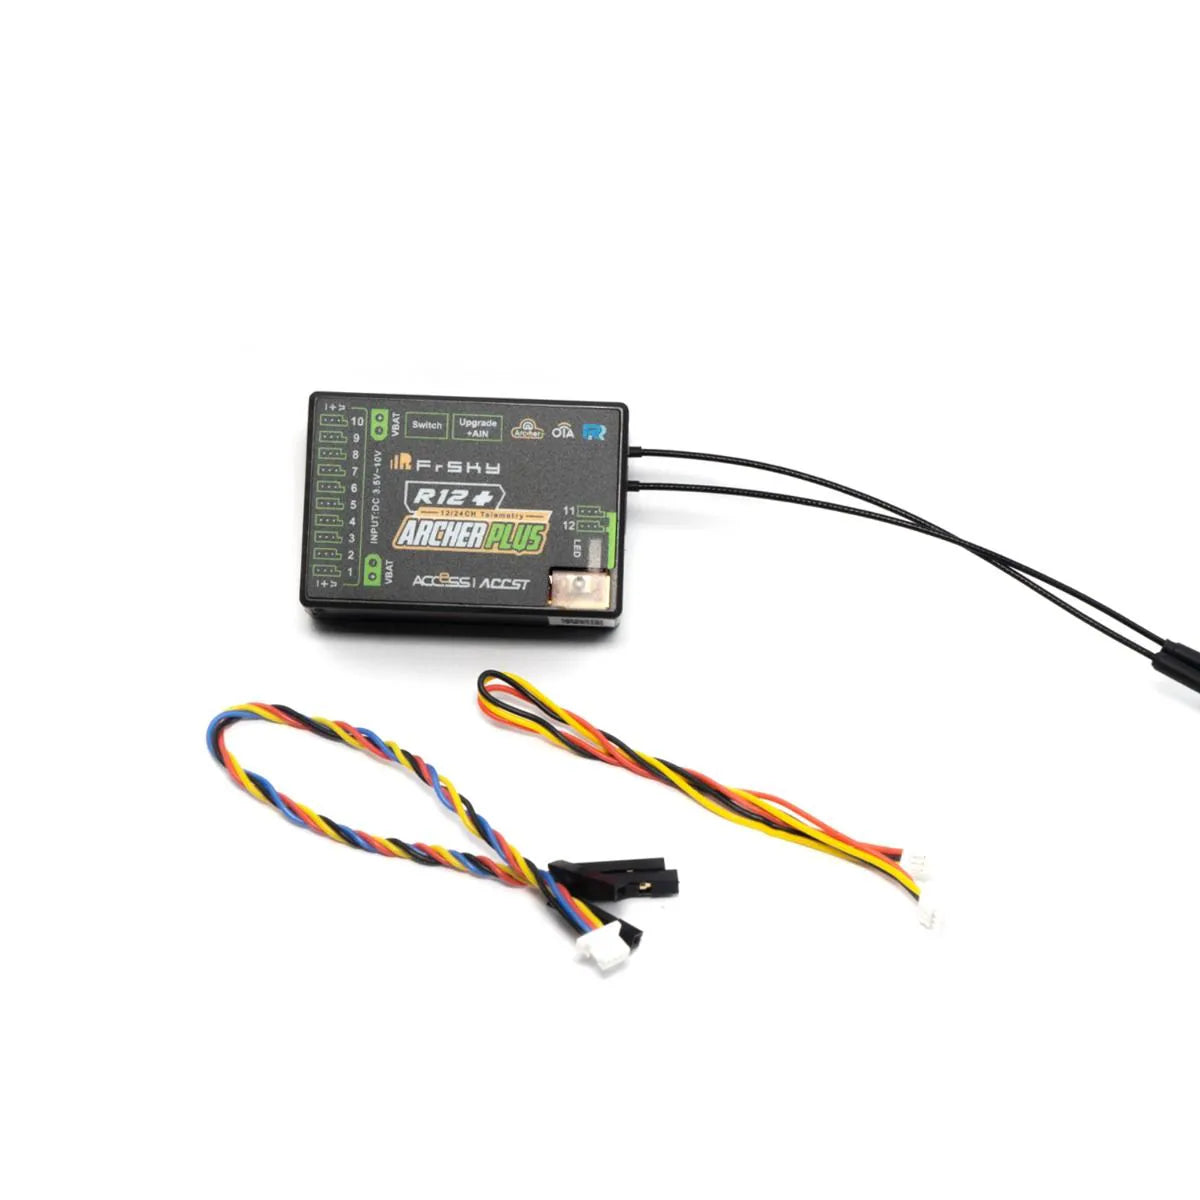 [03020119] FrSky ACCESS Archer Plus SR12 Stabilized Receiver with 12 Channel Ports